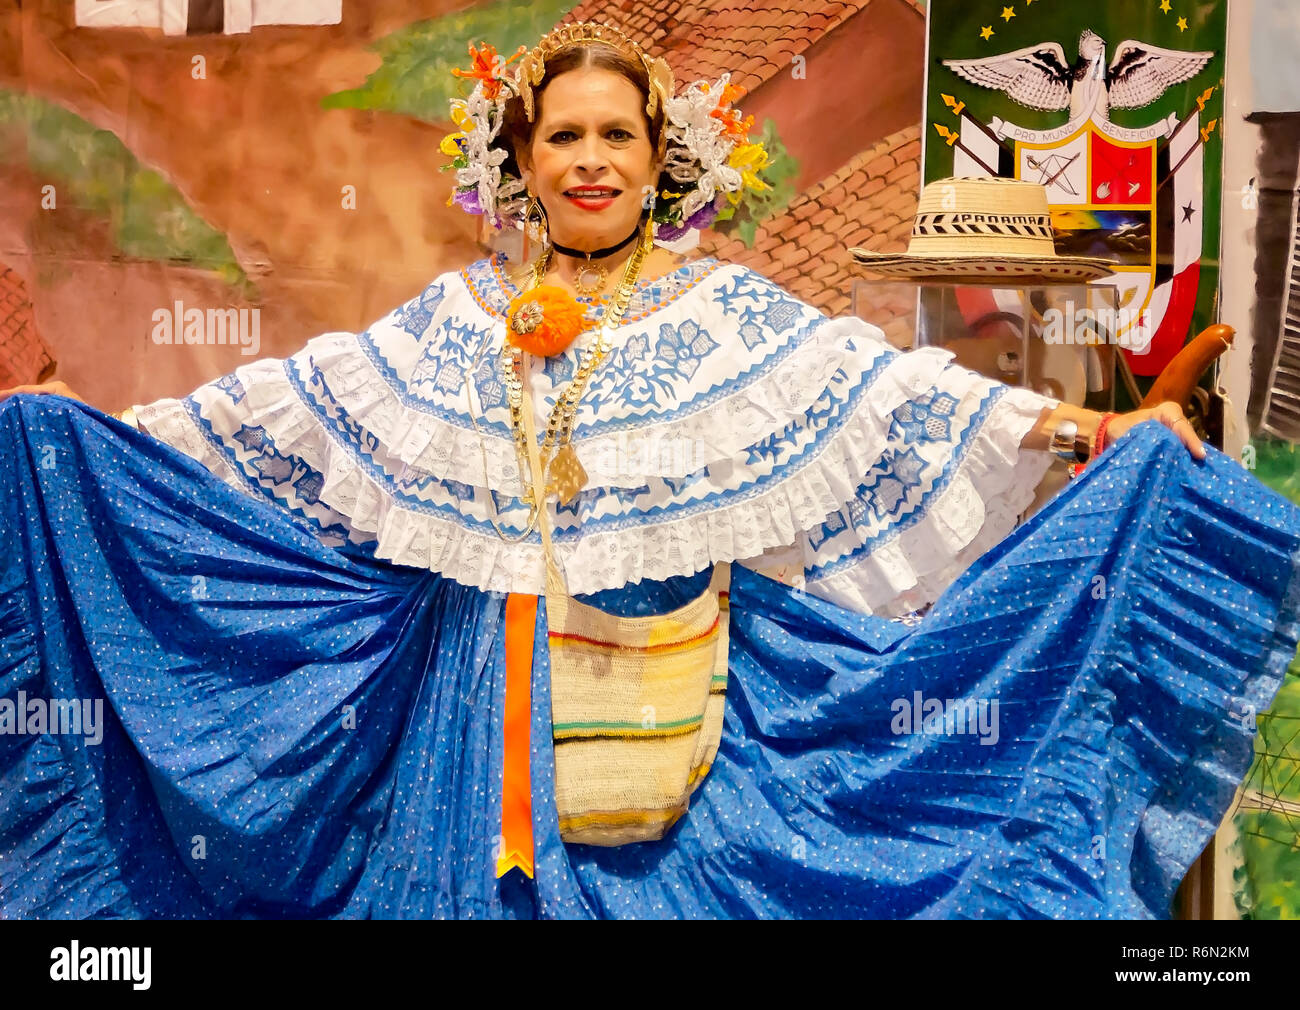 A Panamanian woman shows off her costume at the 34th annual Mobile International Festival, Nov. 17, 2018, in Mobile, Alabama. Stock Photo